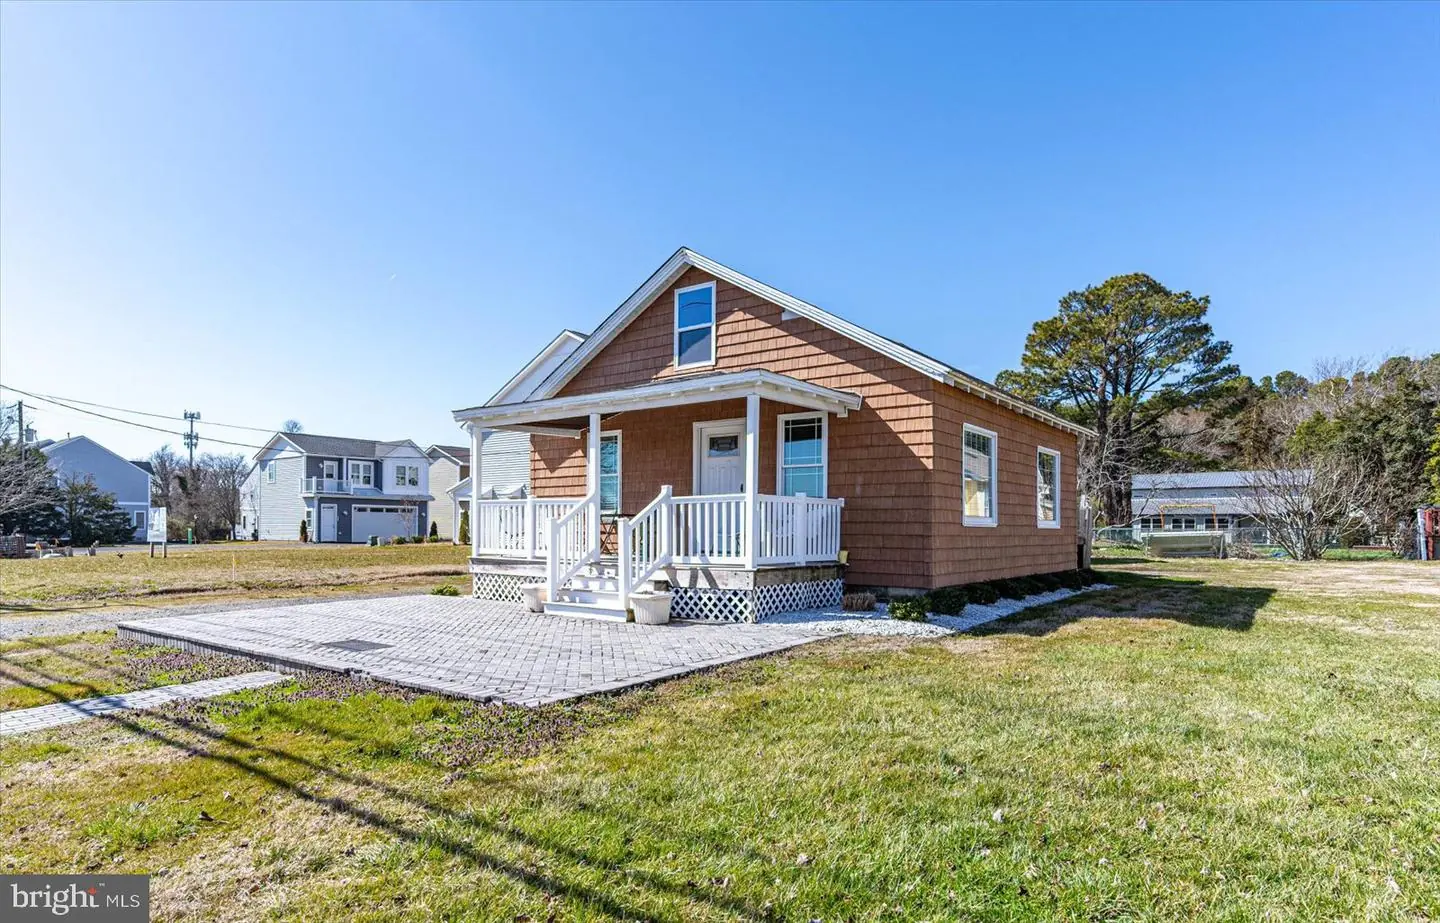 MDWO2019110-802902587622-2024-03-05-14-03-43 9801/9805 Golf Course Rd | Ocean City, MD Real Estate For Sale | MLS# Mdwo2019110  - 1st Choice Properties